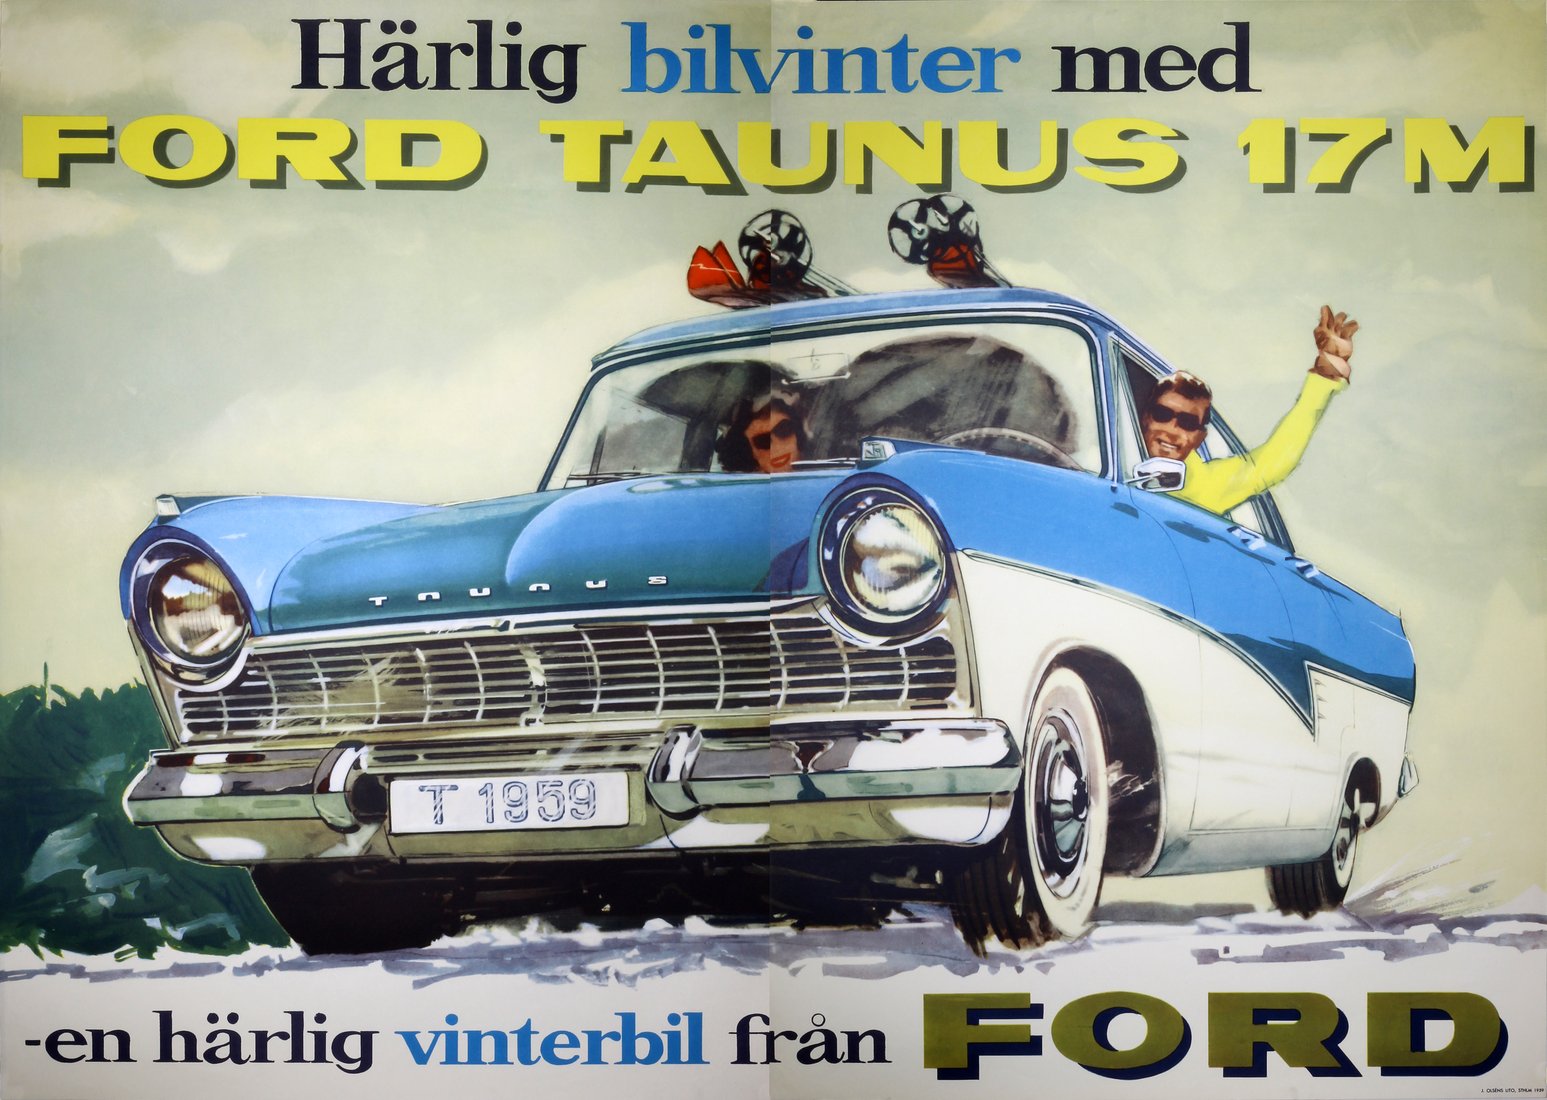 Blog post: Vintage Cars and Vintage Posters by posterteam.com